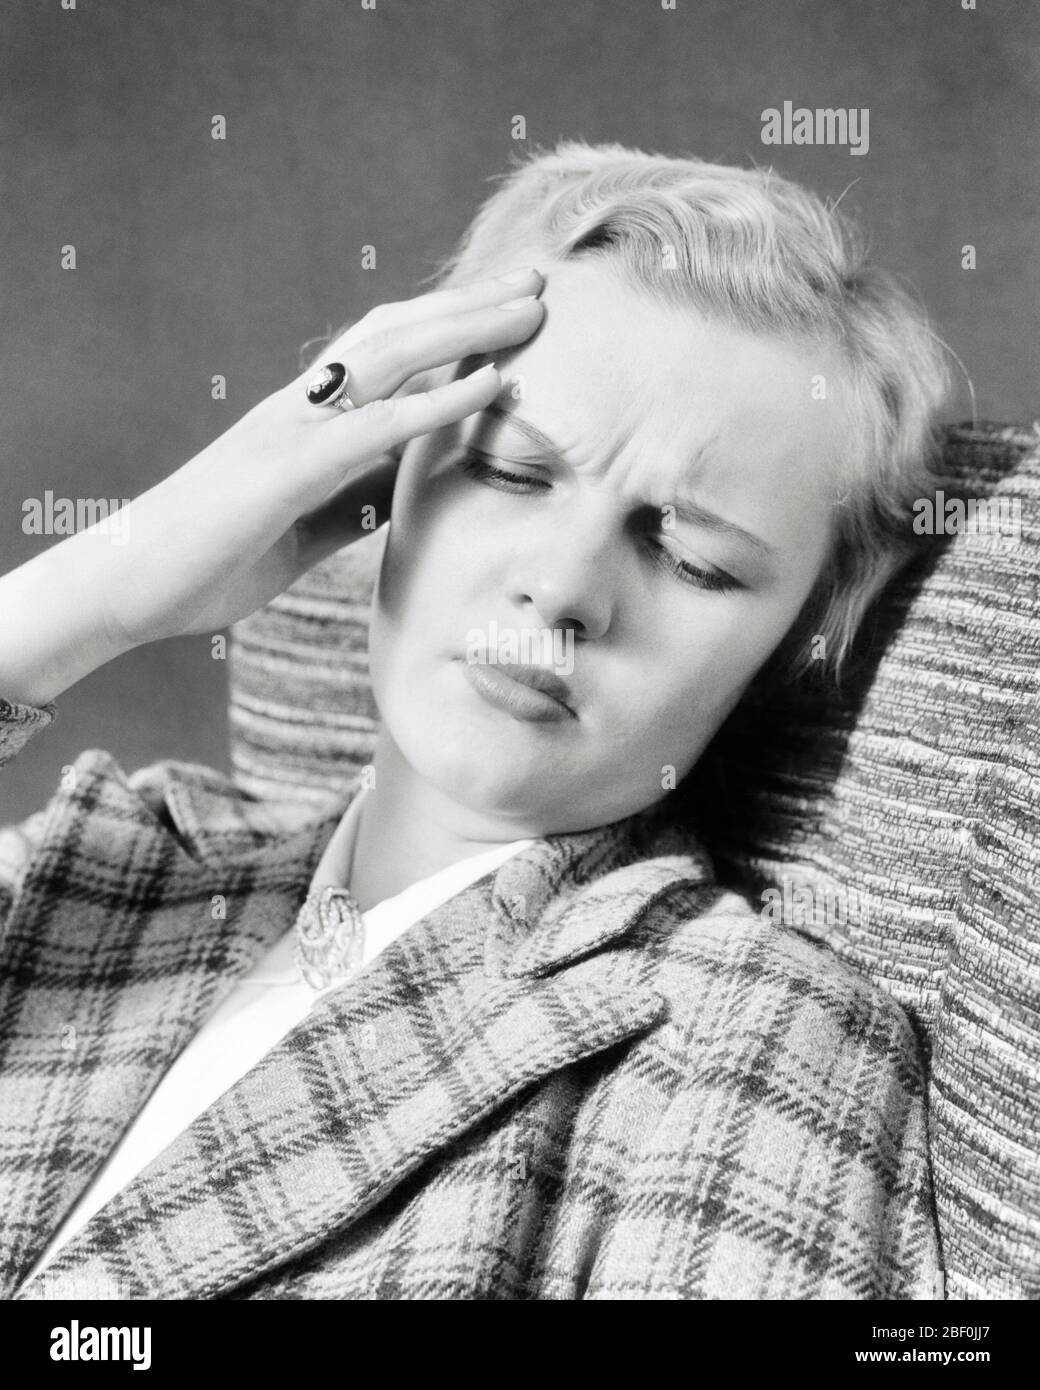 1940s DISTRESSED BLOND WOMAN HAND TO HER FOREHEAD PAINED EXPRESSION EYES CLOSED SUFFERING HEADACHE PAIN - a4180 HAR001 HARS LADIES PERSONS FOREHEAD NERVOUS AILMENT HEADACHE TROUBLED B&W CONCERNED SADNESS HEALTHCARE ANXIETY SUFFERING PREVENTION HEAD AND SHOULDERS DISTRESSED HEALING DIAGNOSIS DESPAIR HEALTH CARE IMPAIRMENT MOOD TREATMENT MENTAL HEALTH GLUM PAINED PANORAMIC POOR HEALTH TENSION AILING EMOTION EMOTIONAL EMOTIONS MID-ADULT MID-ADULT WOMAN MISERABLE SINUS BLACK AND WHITE CAUCASIAN ETHNICITY DISEASE EYES CLOSED HAR001 MENTAL ILLNESS OLD FASHIONED Stock Photo